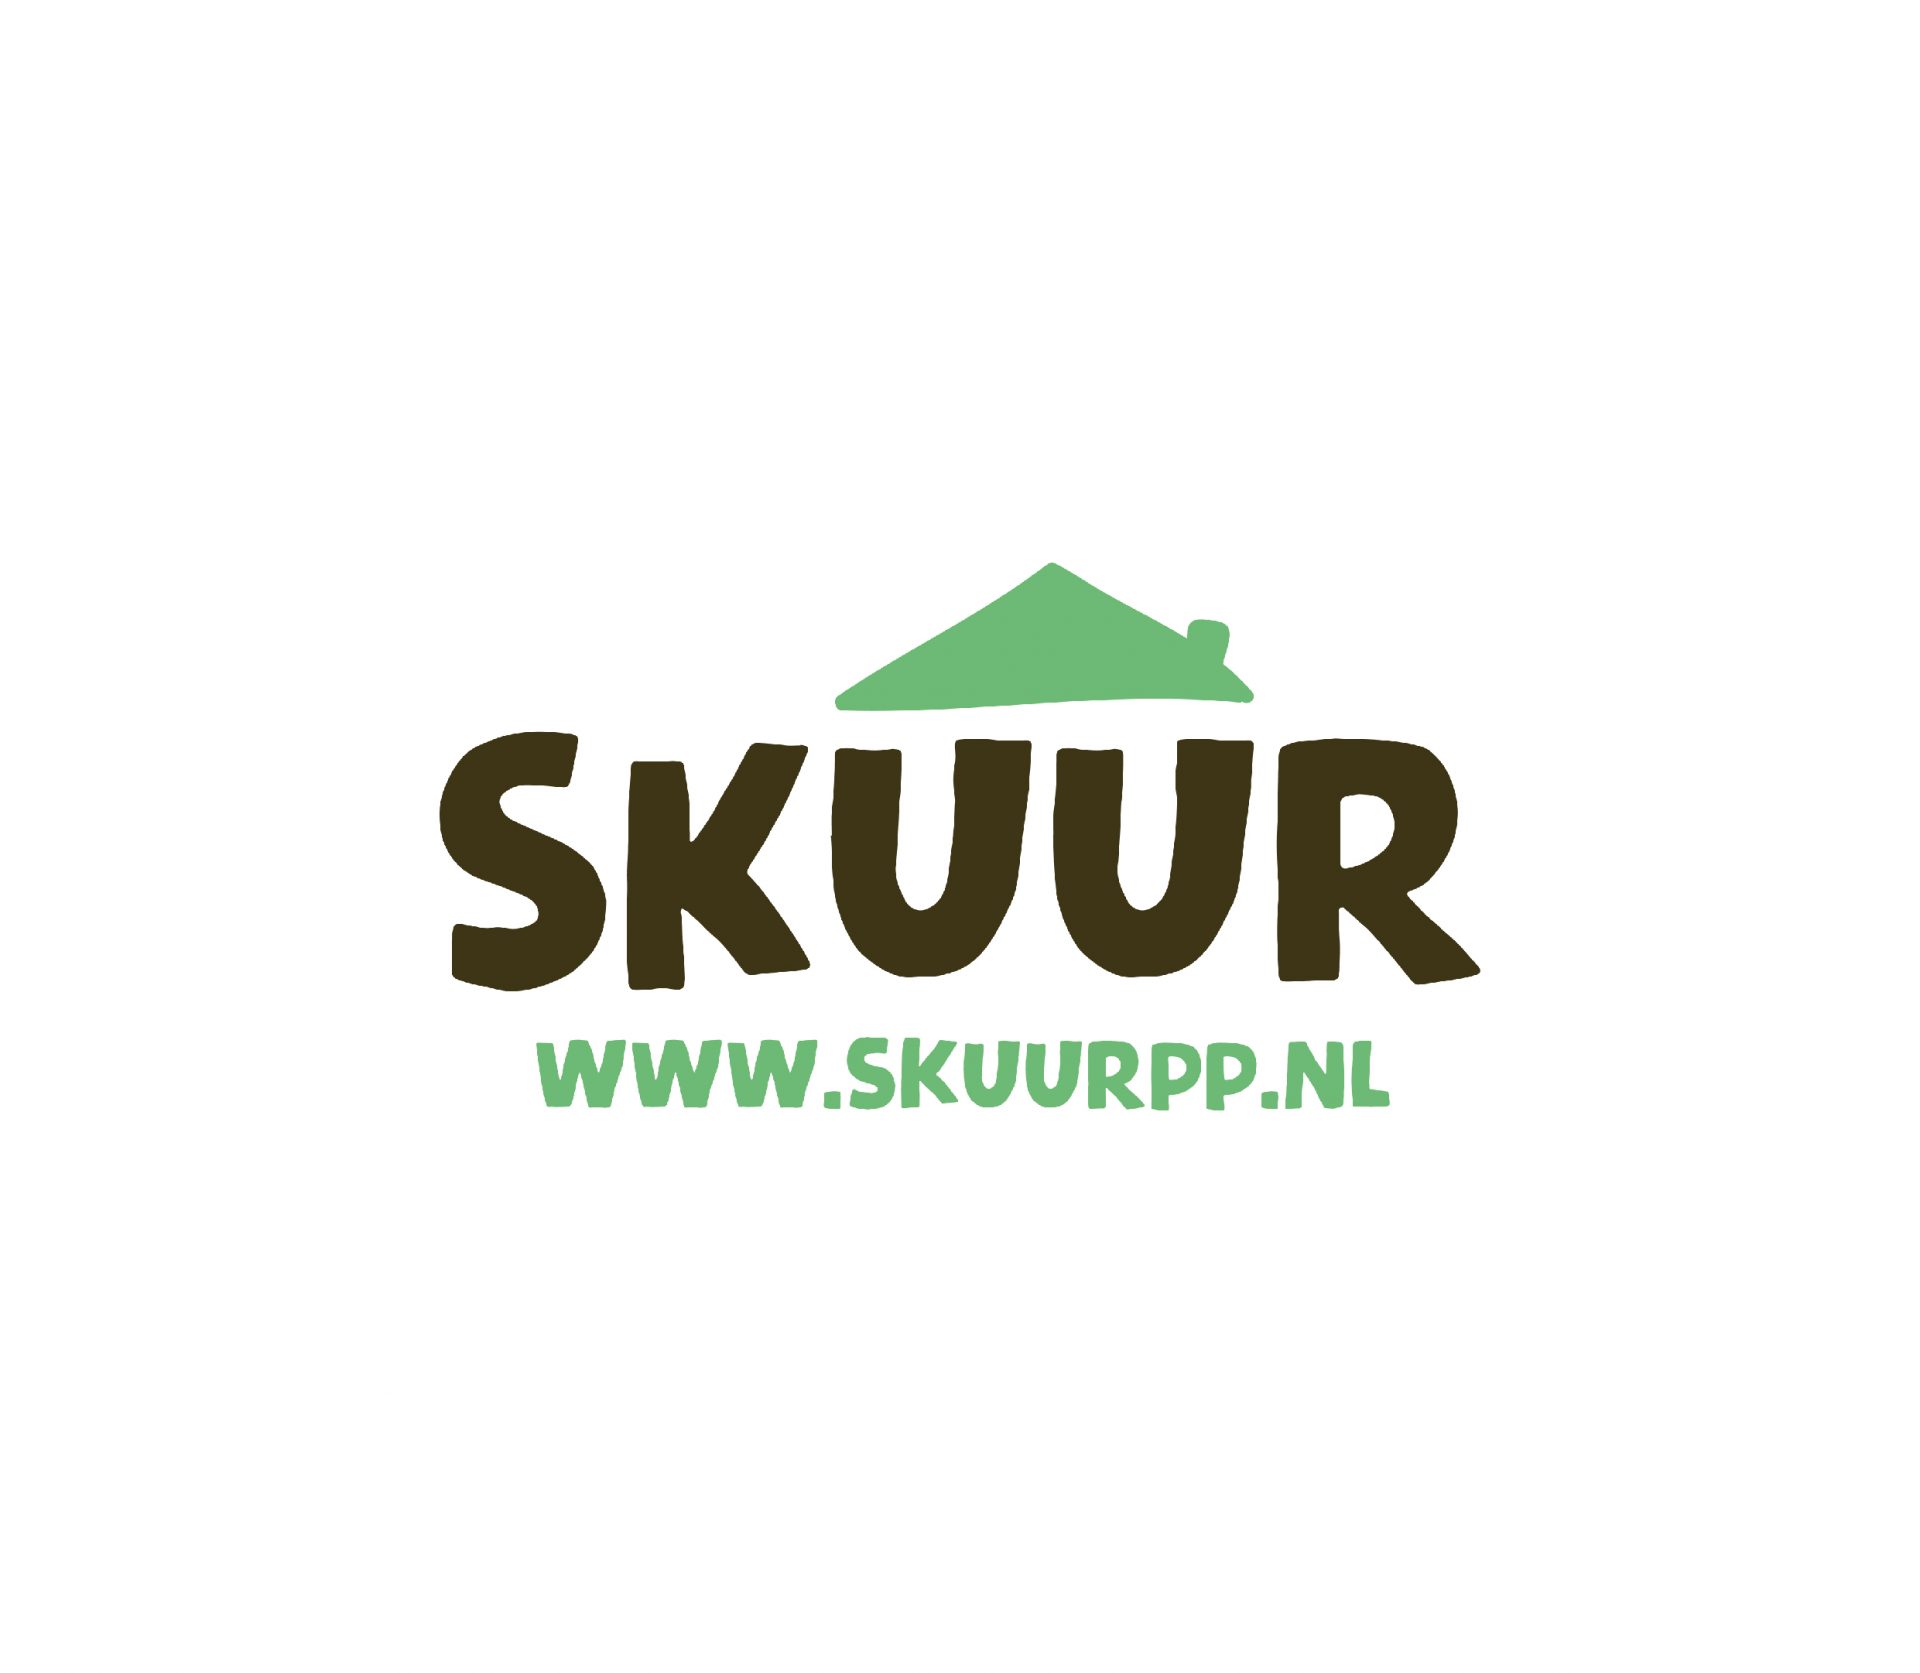 Skuur Personal Products